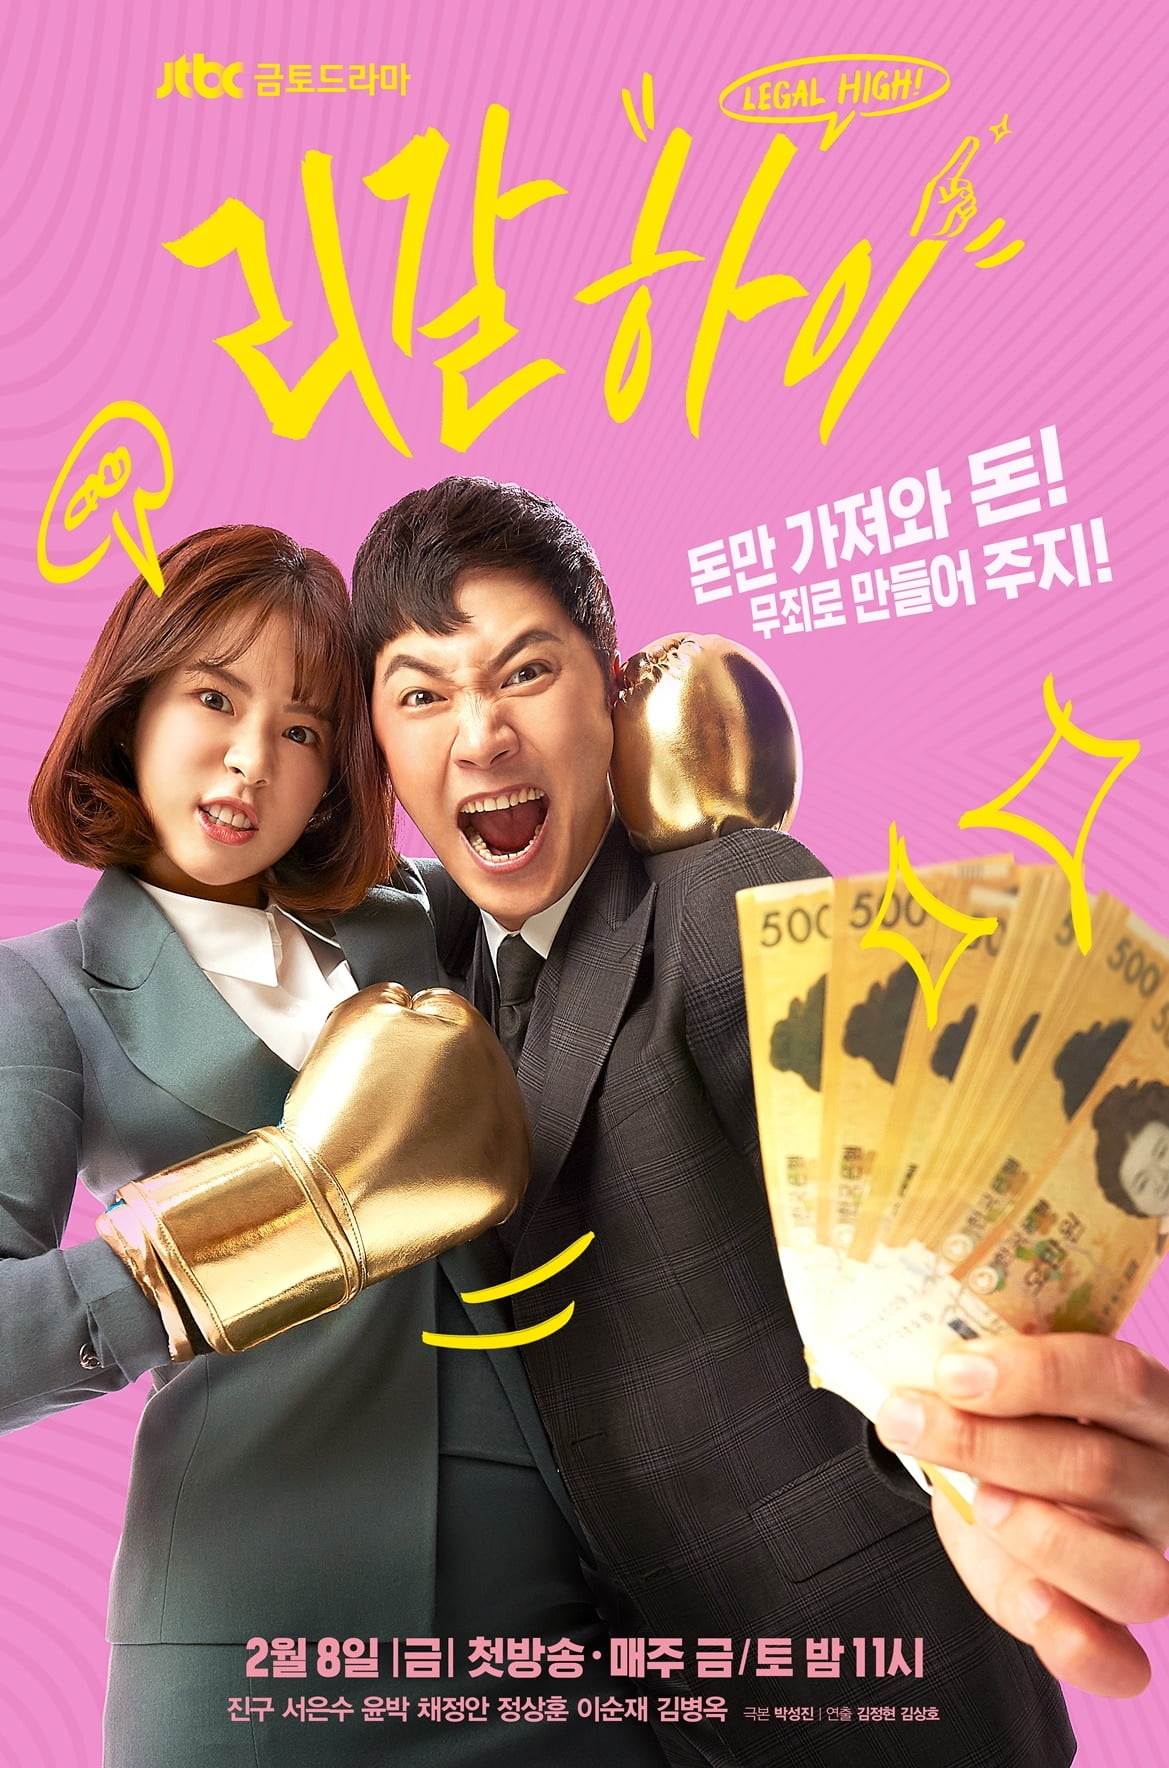 Legal High - Sinopsis, Pemain, OST, Episode, Review